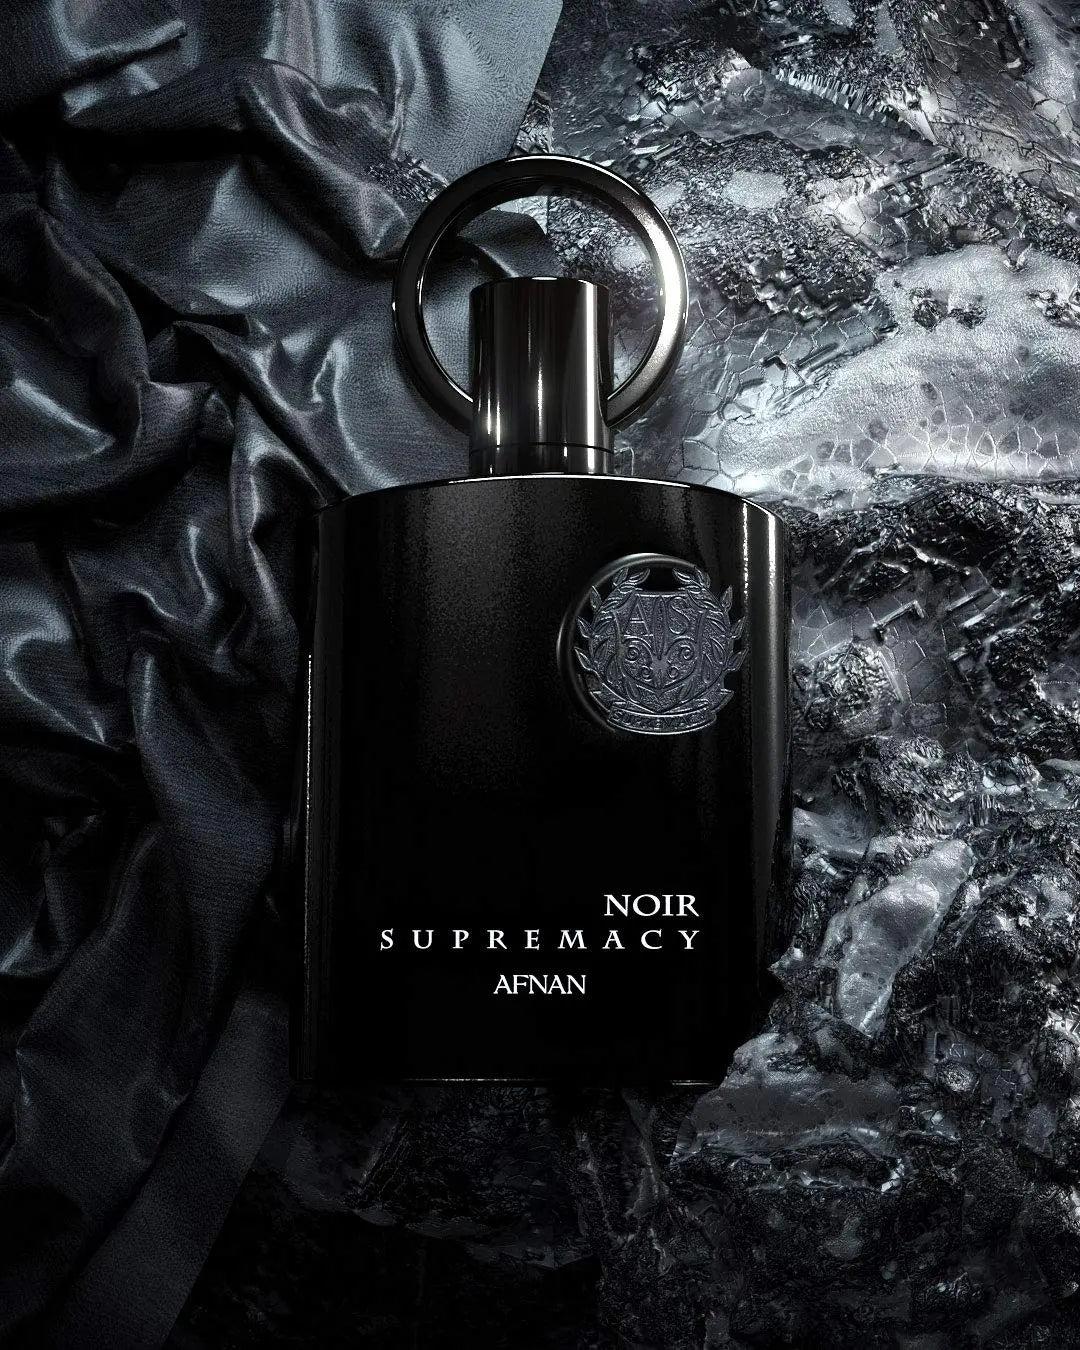 The image depicts a black perfume bottle labeled "NOIR SUPREMACY AFNAN" resting on a textured surface that appears to be a mix of crumpled satin fabric and reflective metallic foil. The perfume bottle has a unique design with a ring-shaped cap at the top and features a prominent metallic emblem. The composition of the photo creates a luxurious and dramatic effect, with the dark tones and textures emphasizing the sleekness and elegance of the perfume bottle.